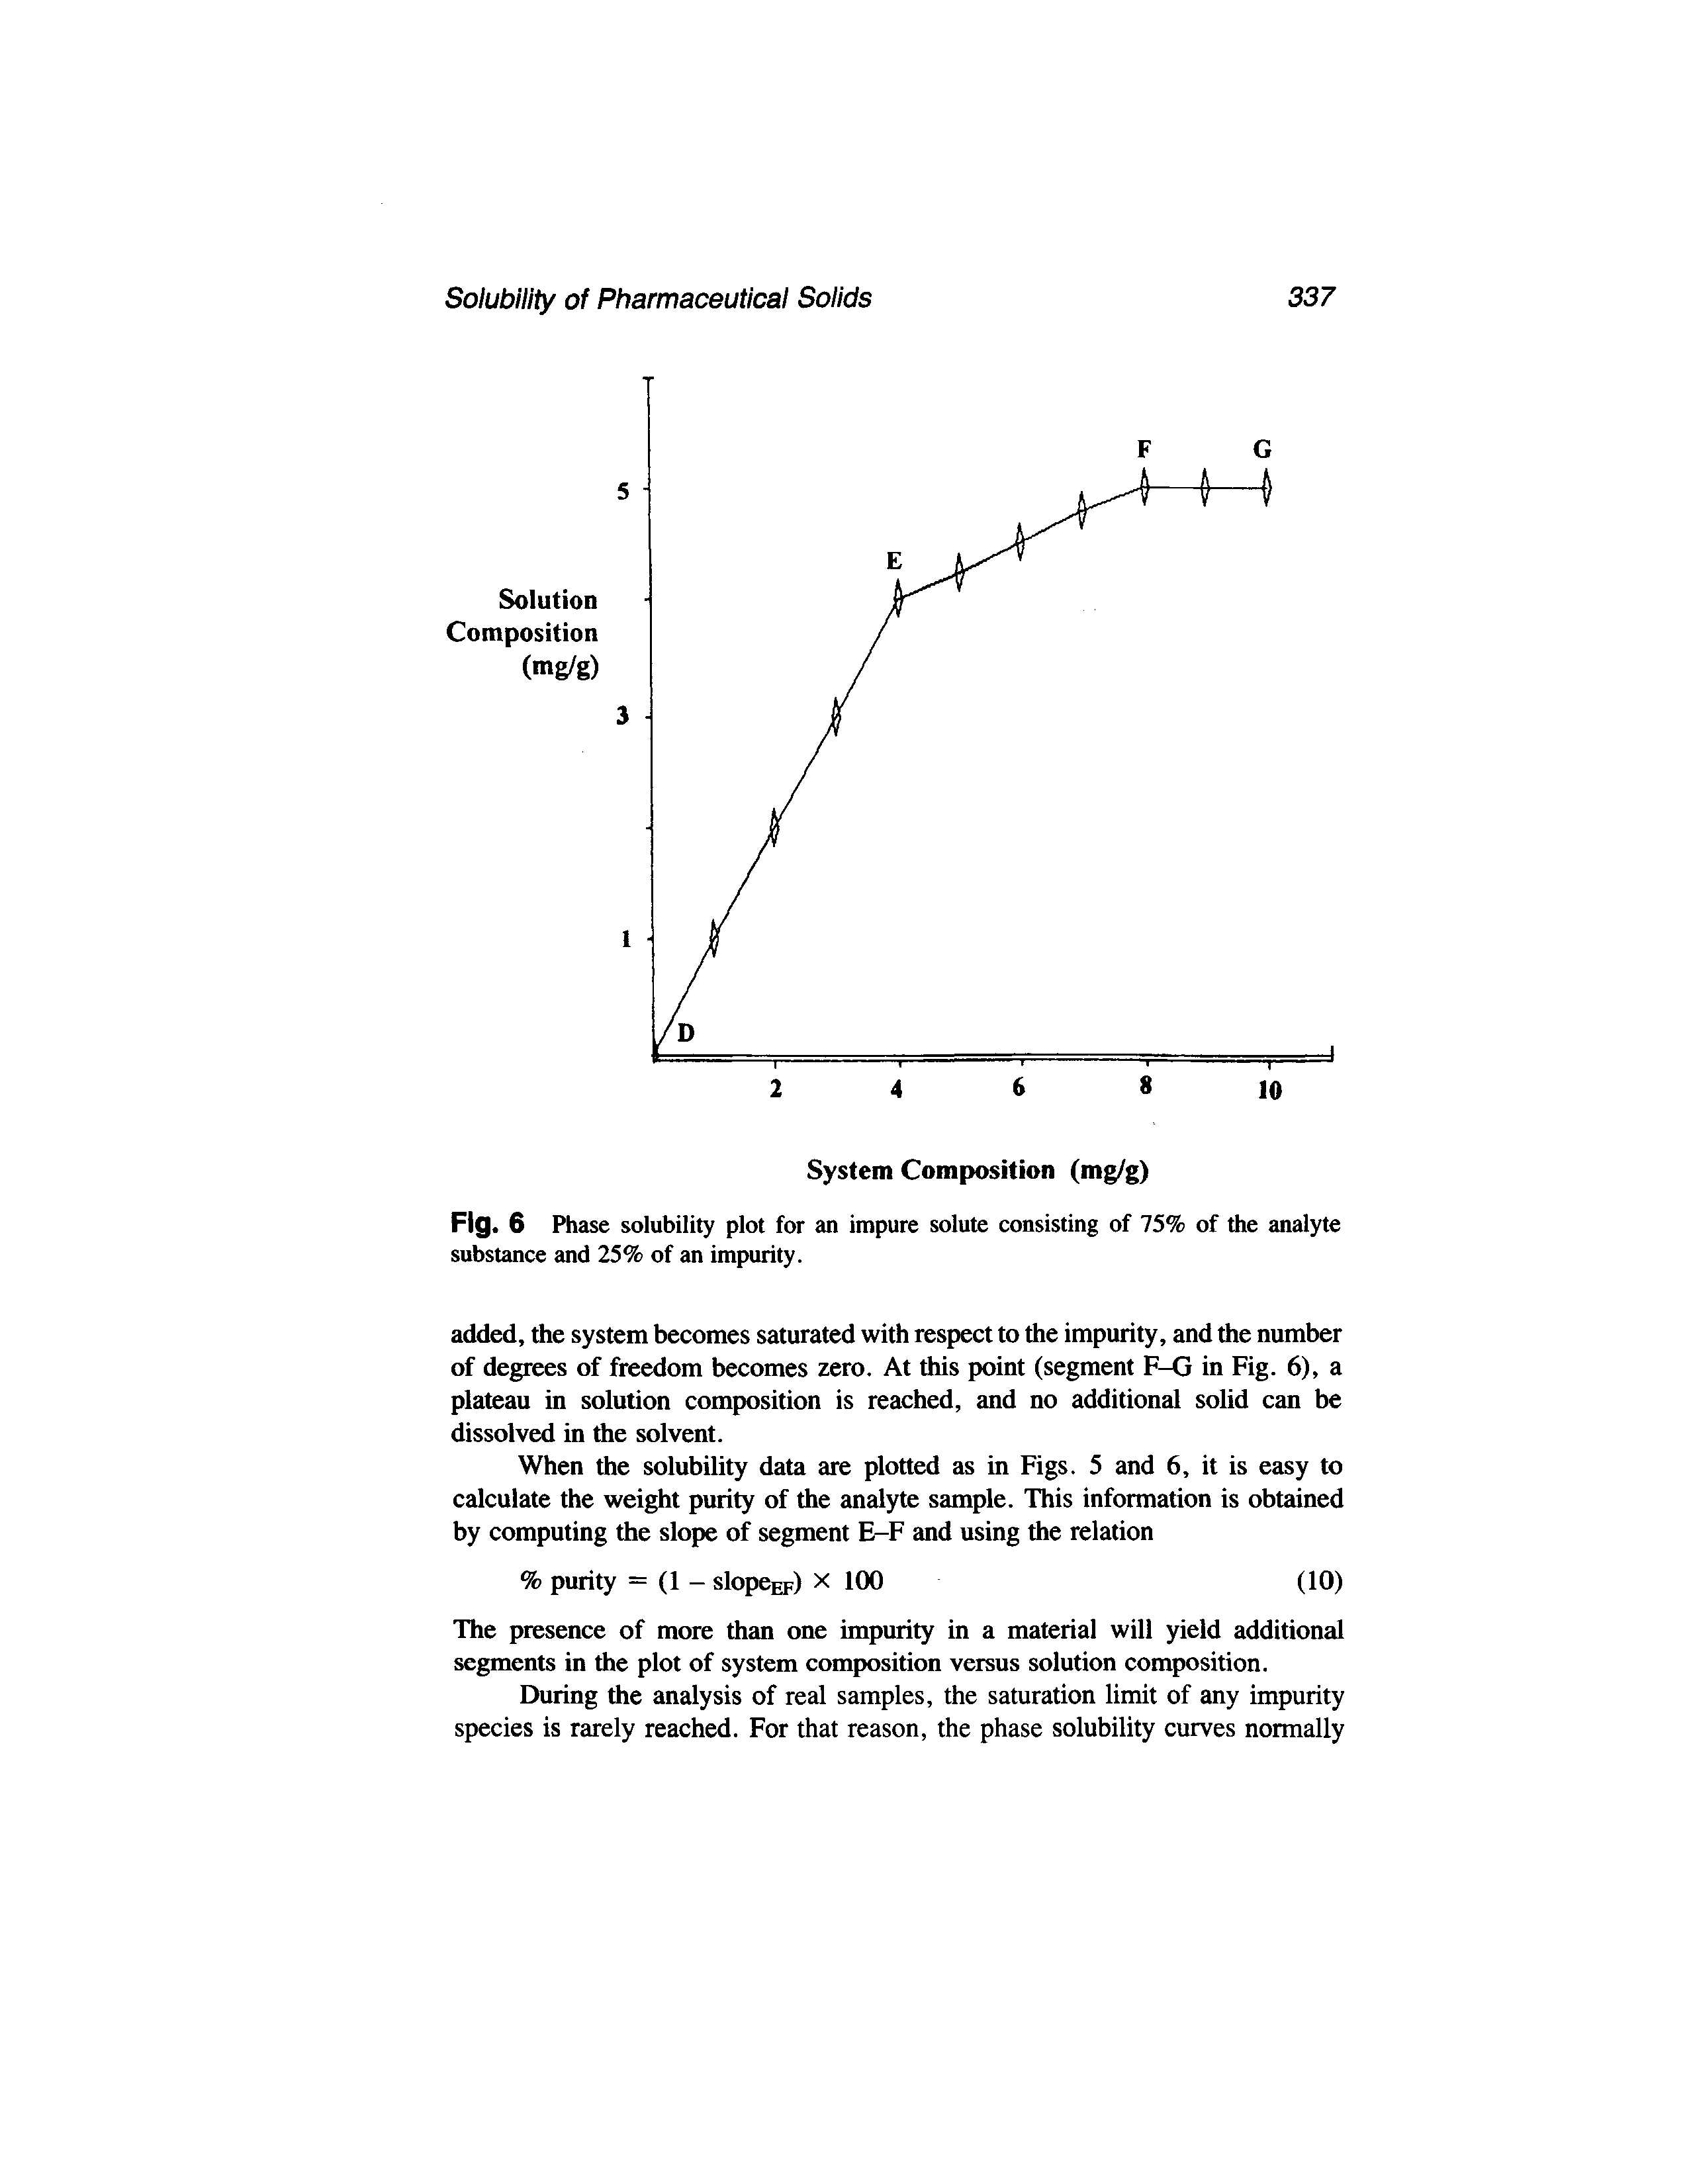 Fig. 6 Phase solubility plot for an impure solute consisting of 75% of the analyte substance and 25% of an impurity.